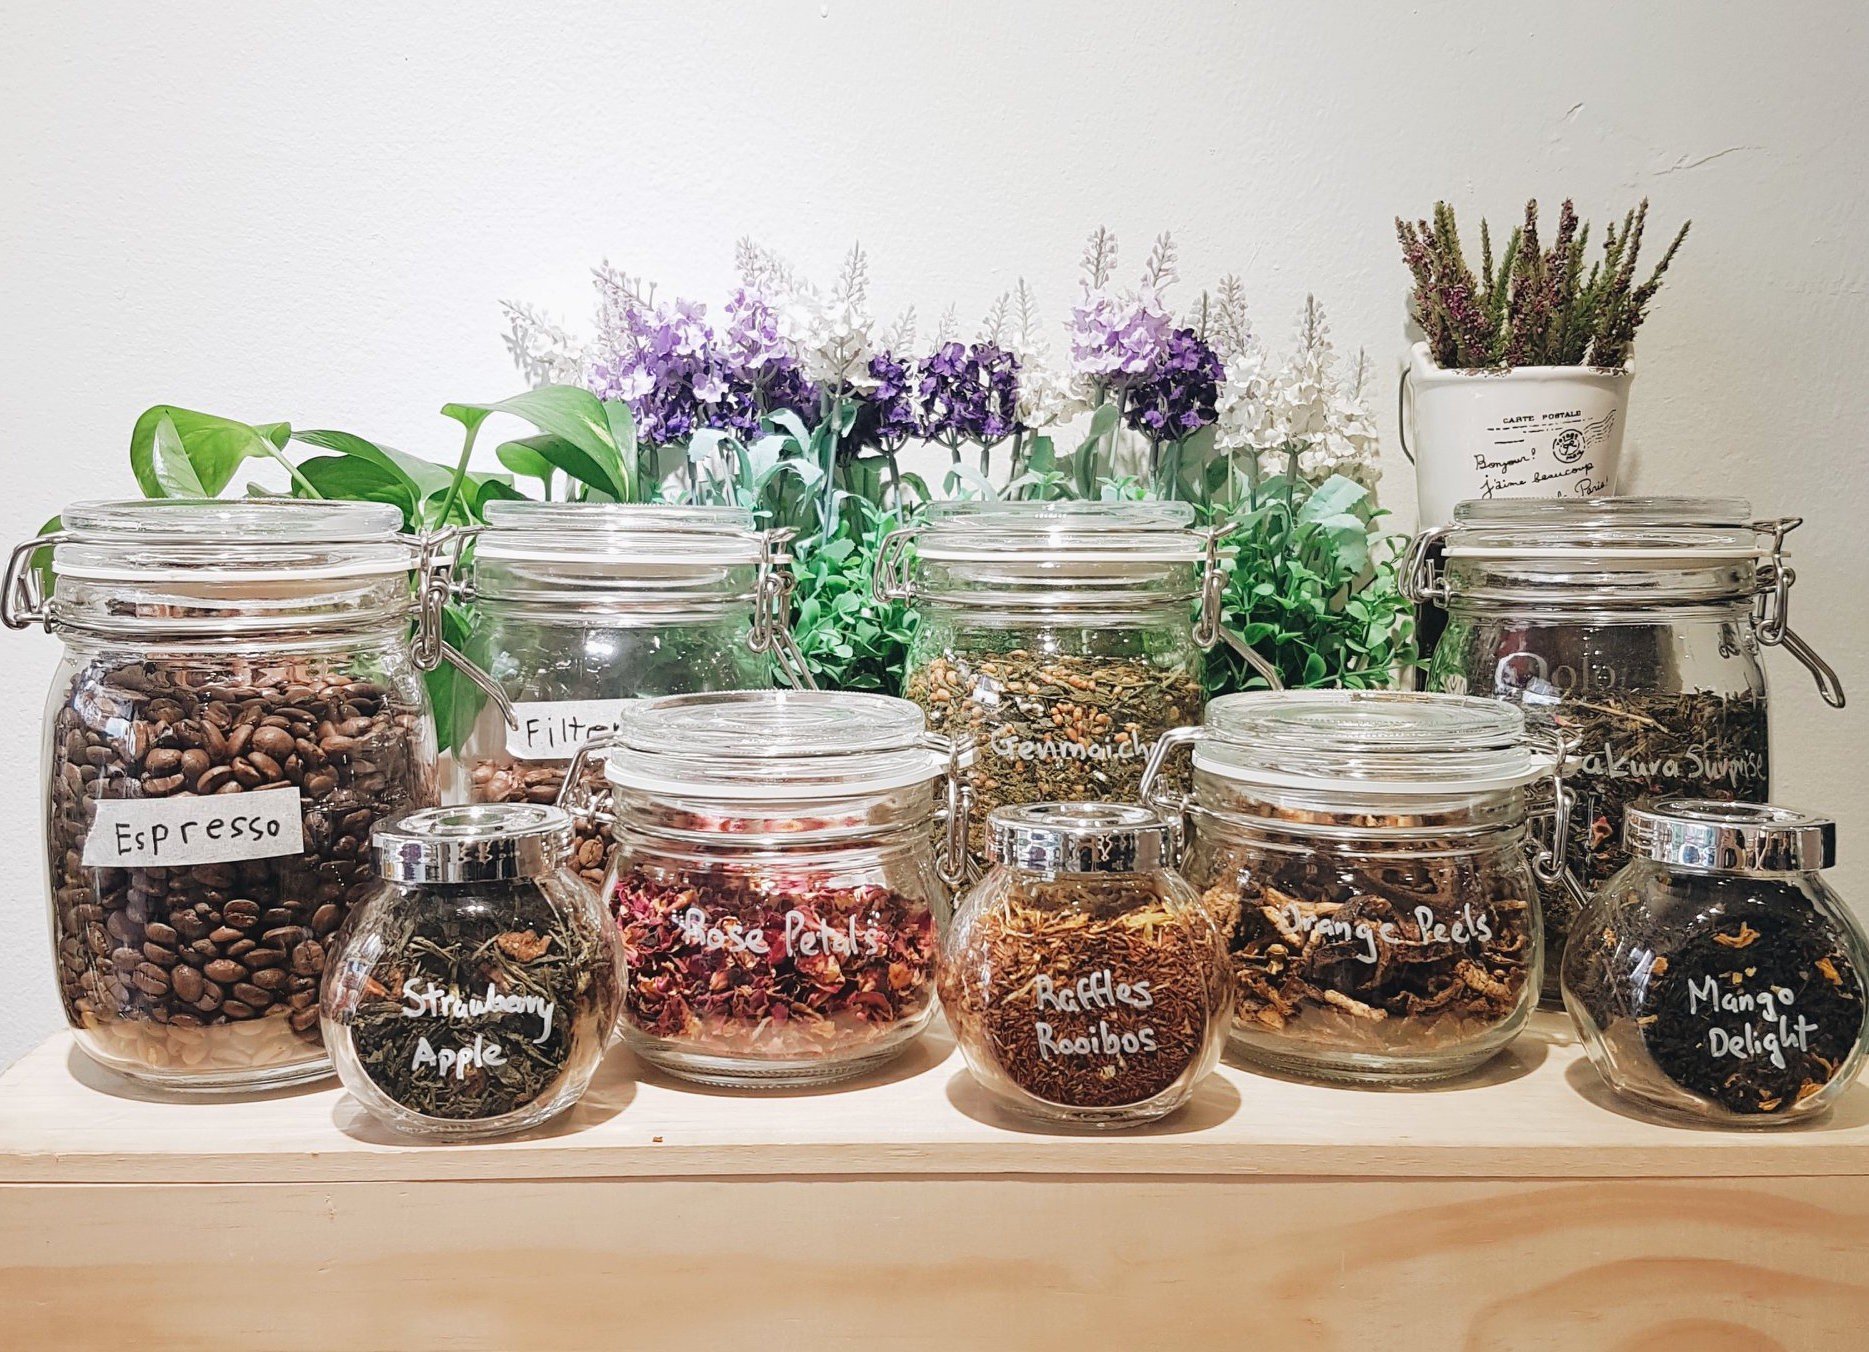 Bring your own container to cut back on waste. Photo: Green is the New Black